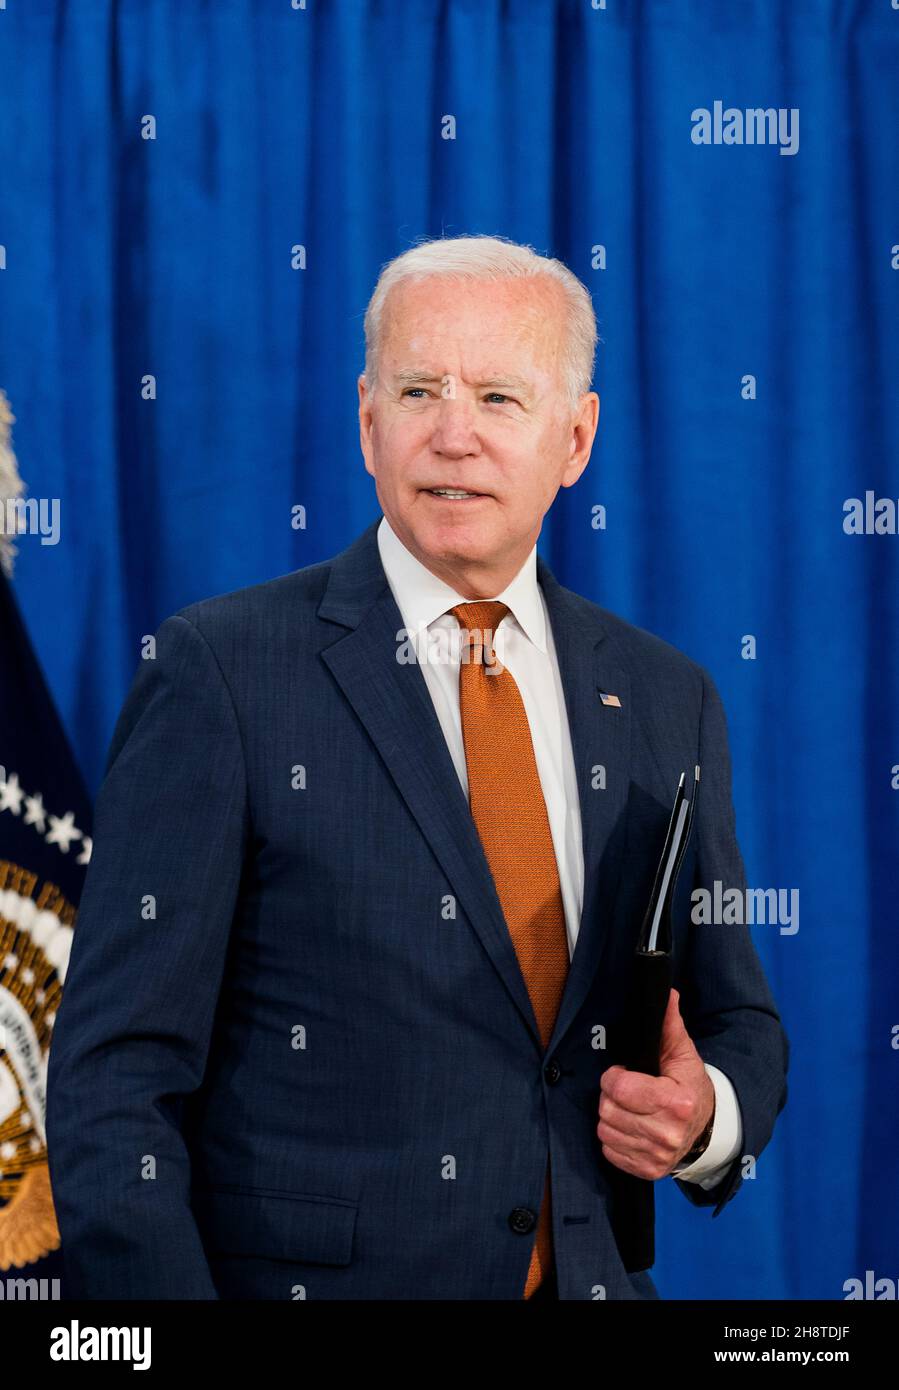 REHOBOTH, DELAWARE, USA - 04 June 2021 - US President Joe Biden delivers remarks on the May jobs report on Friday, June 4, 2021, at the Rehoboth Beach Stock Photo